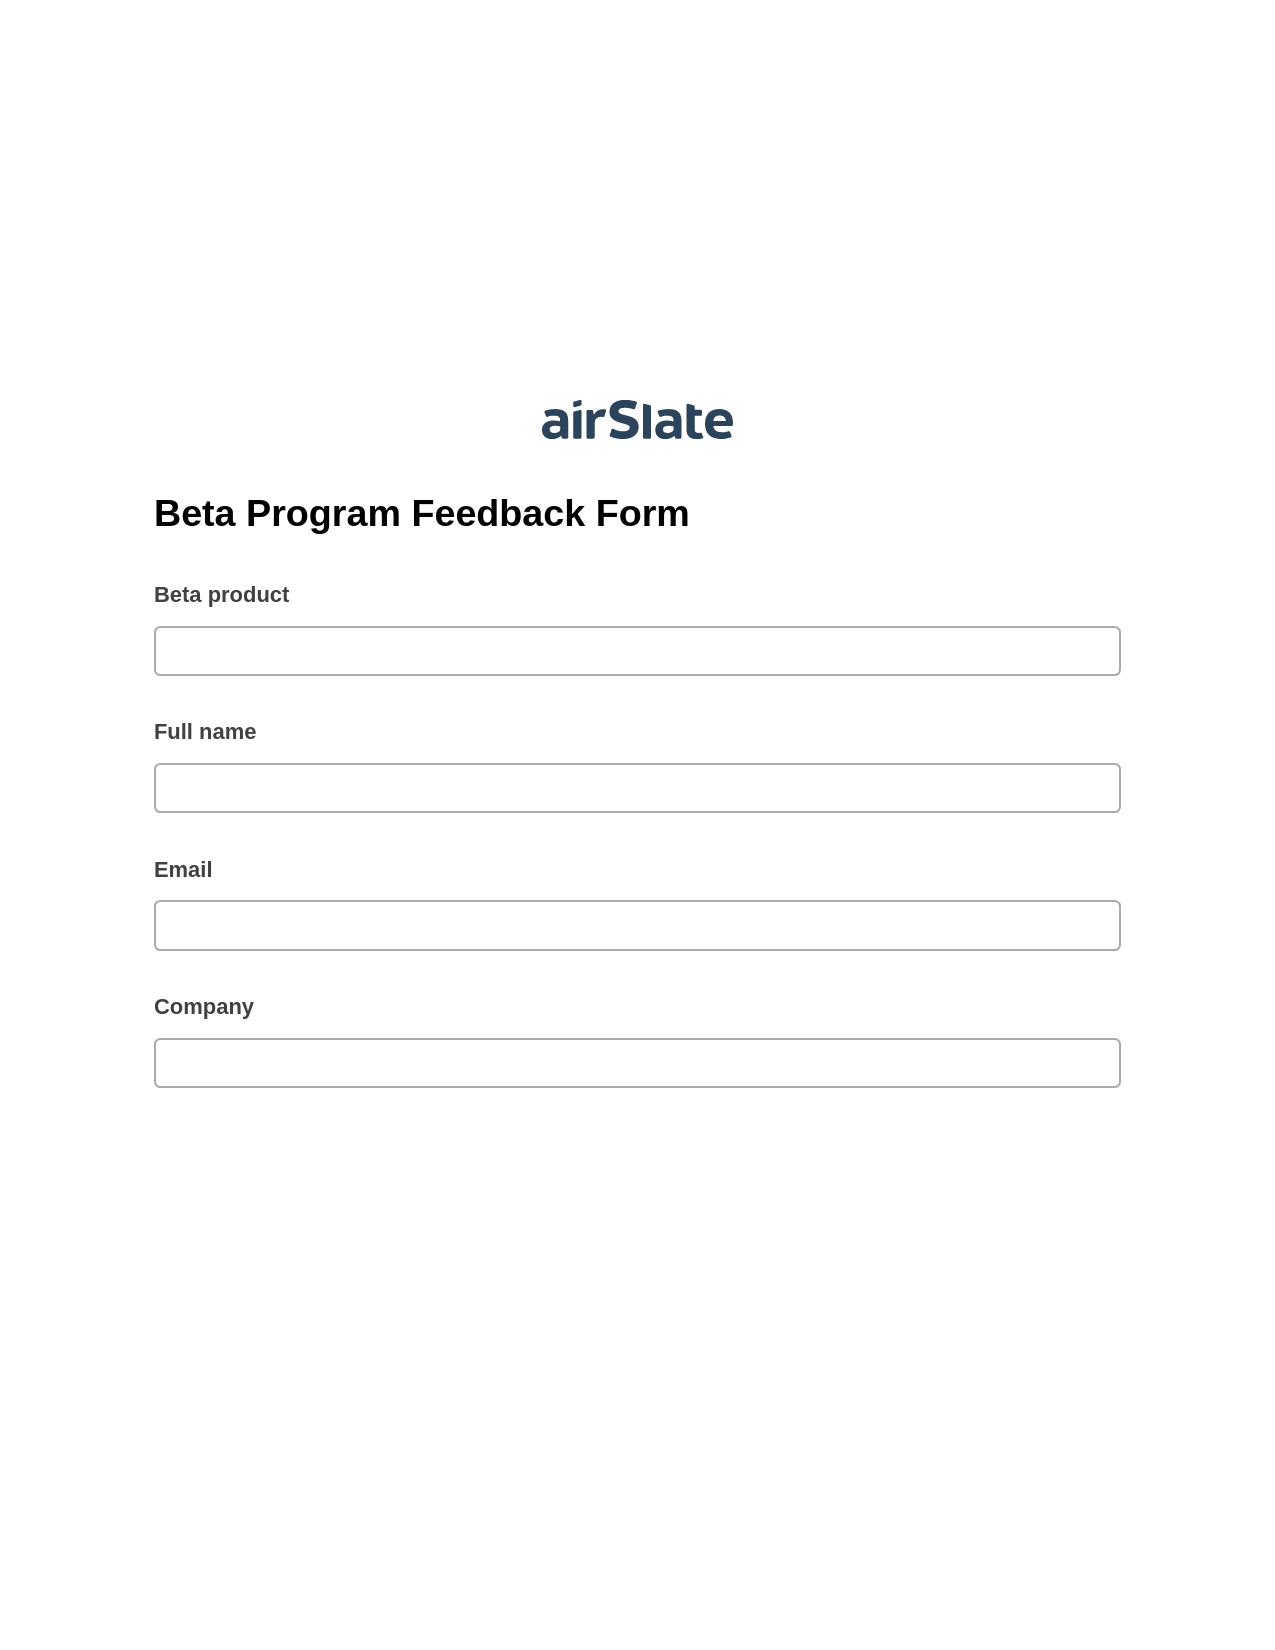 Multirole Beta Program Feedback Form Pre-fill Document Bot, Create slate from another Flow Bot, Box Bot